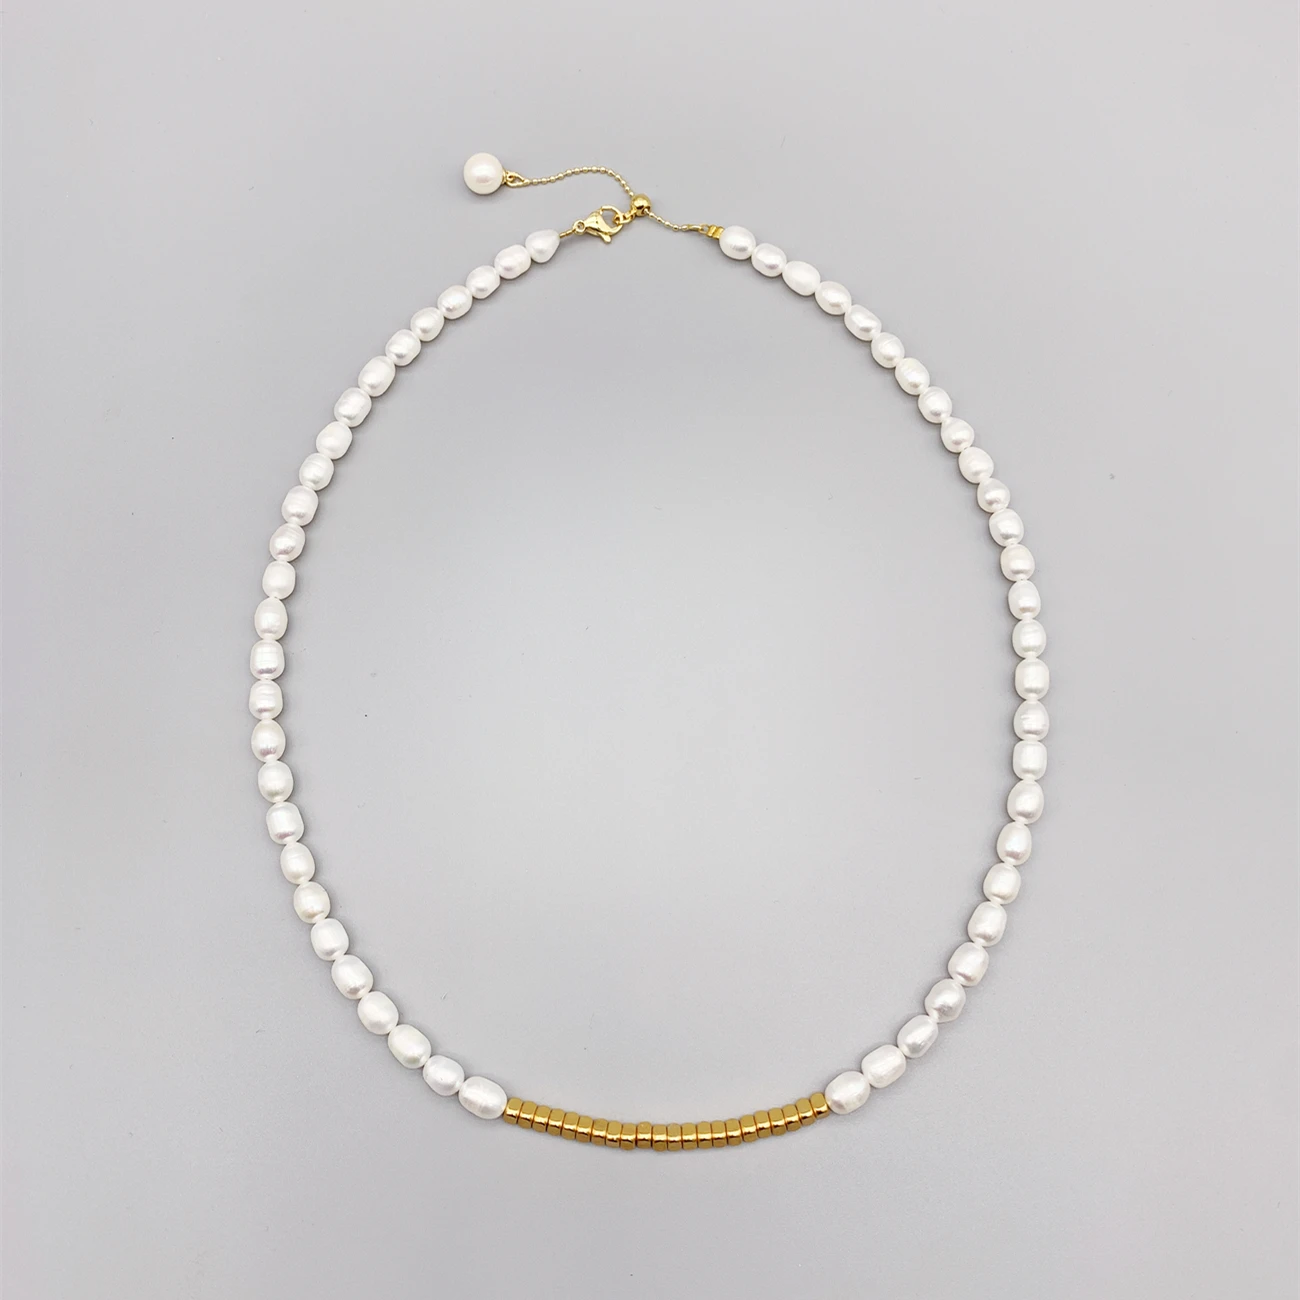 

FoLisaUnique 5.5-6mm White Freshwater Round Rice Pearls Necklace Adjustable Length 14K Gold Filled Beads Pendant